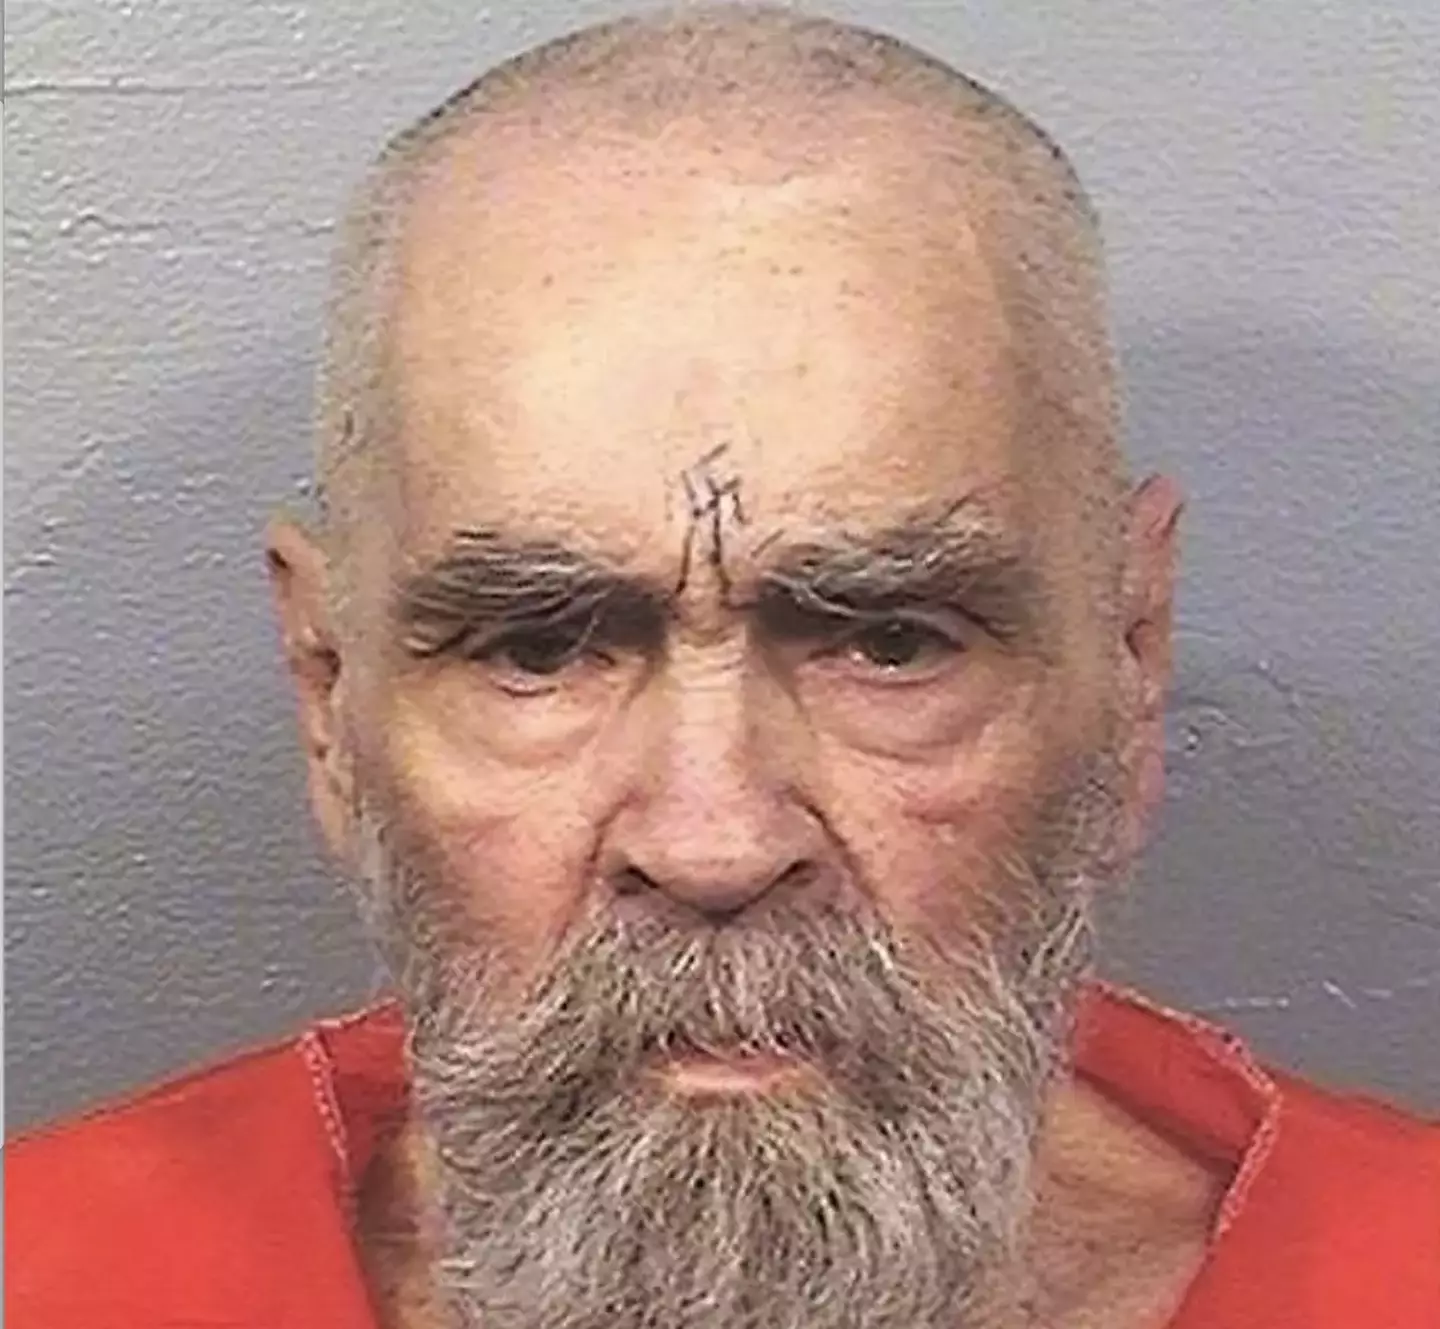 Charles Manson died in 2017 at the age of 83.